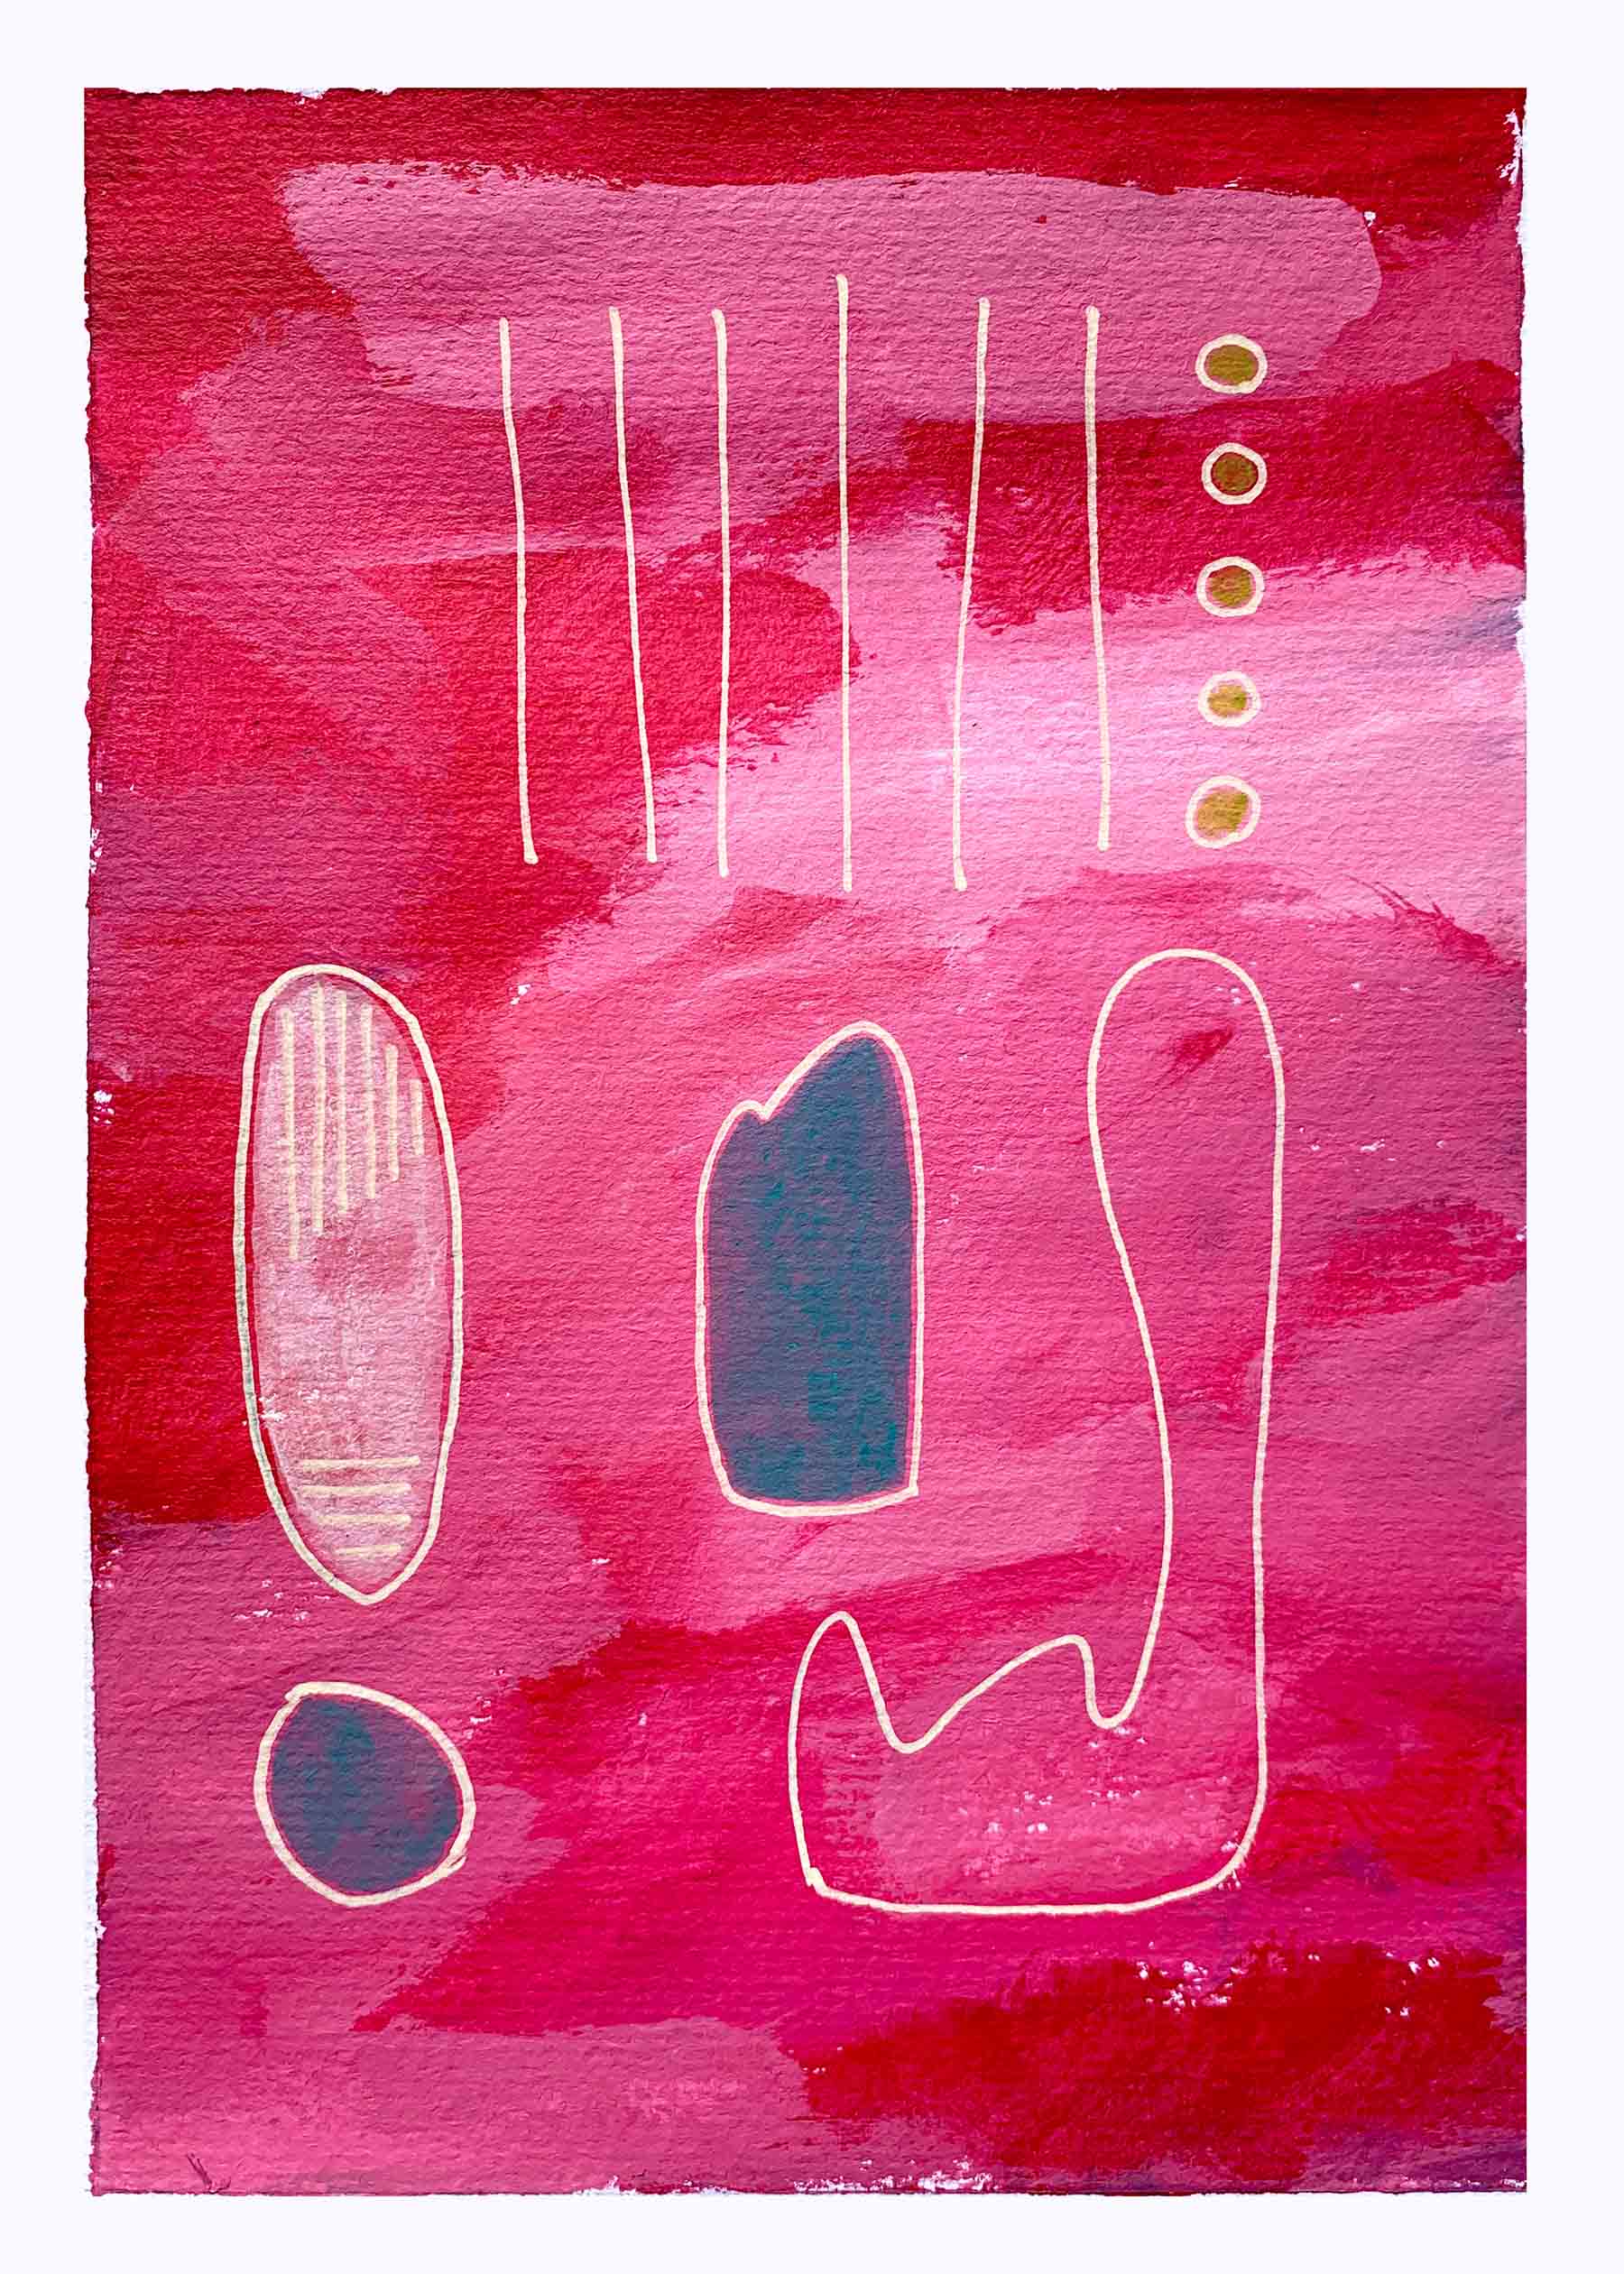 art every day number 623 / painting / pink & red ii